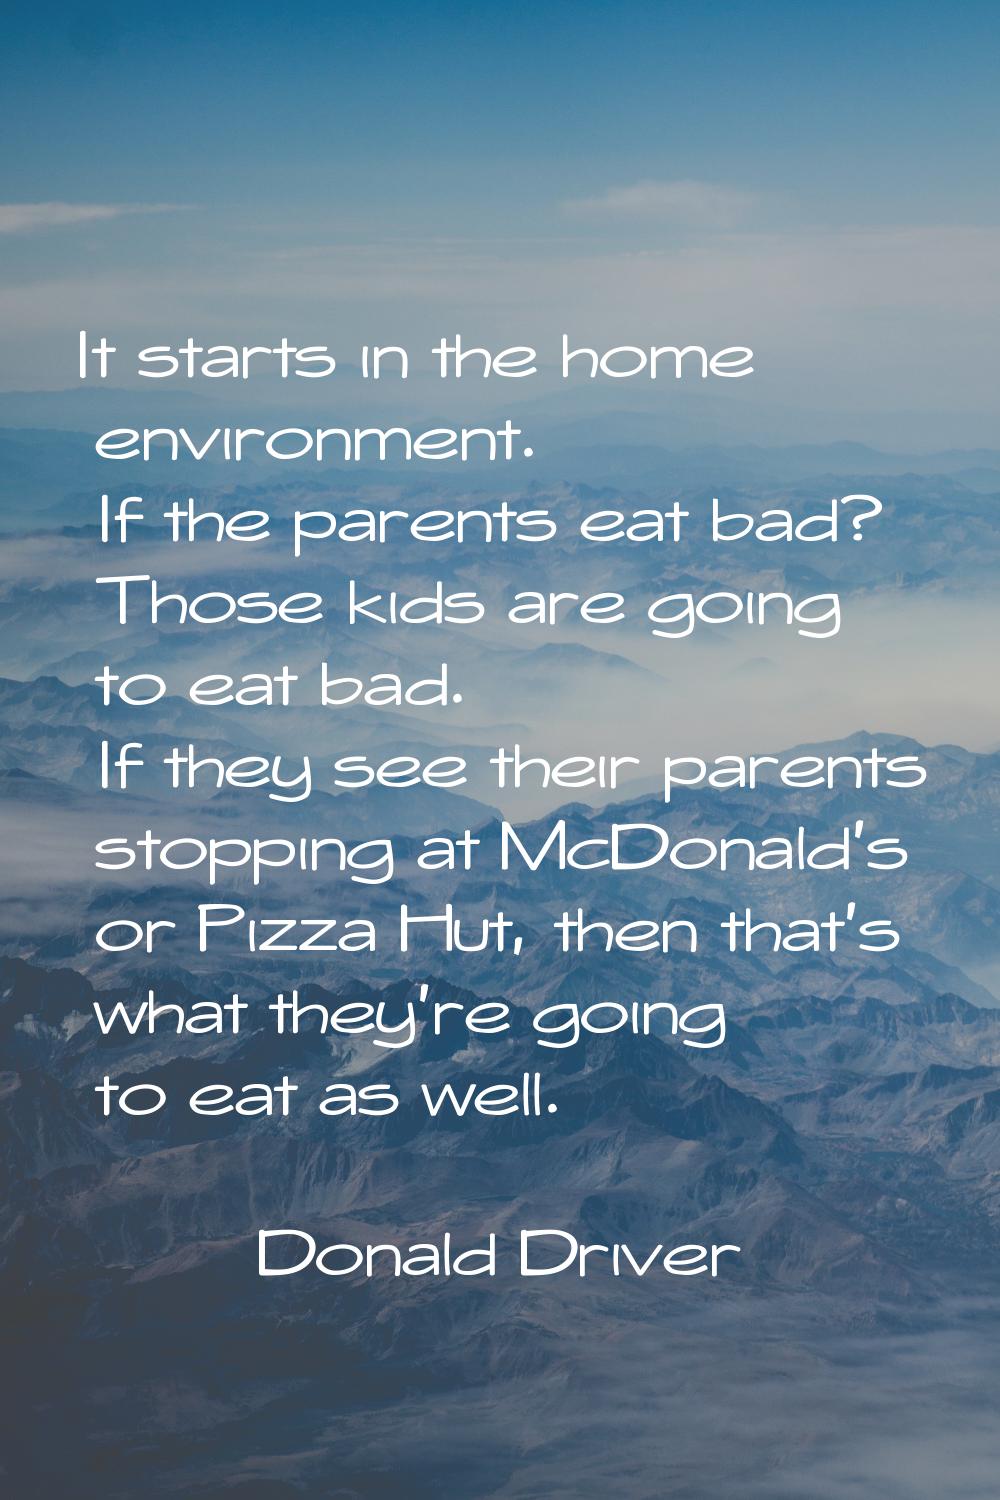 It starts in the home environment. If the parents eat bad? Those kids are going to eat bad. If they